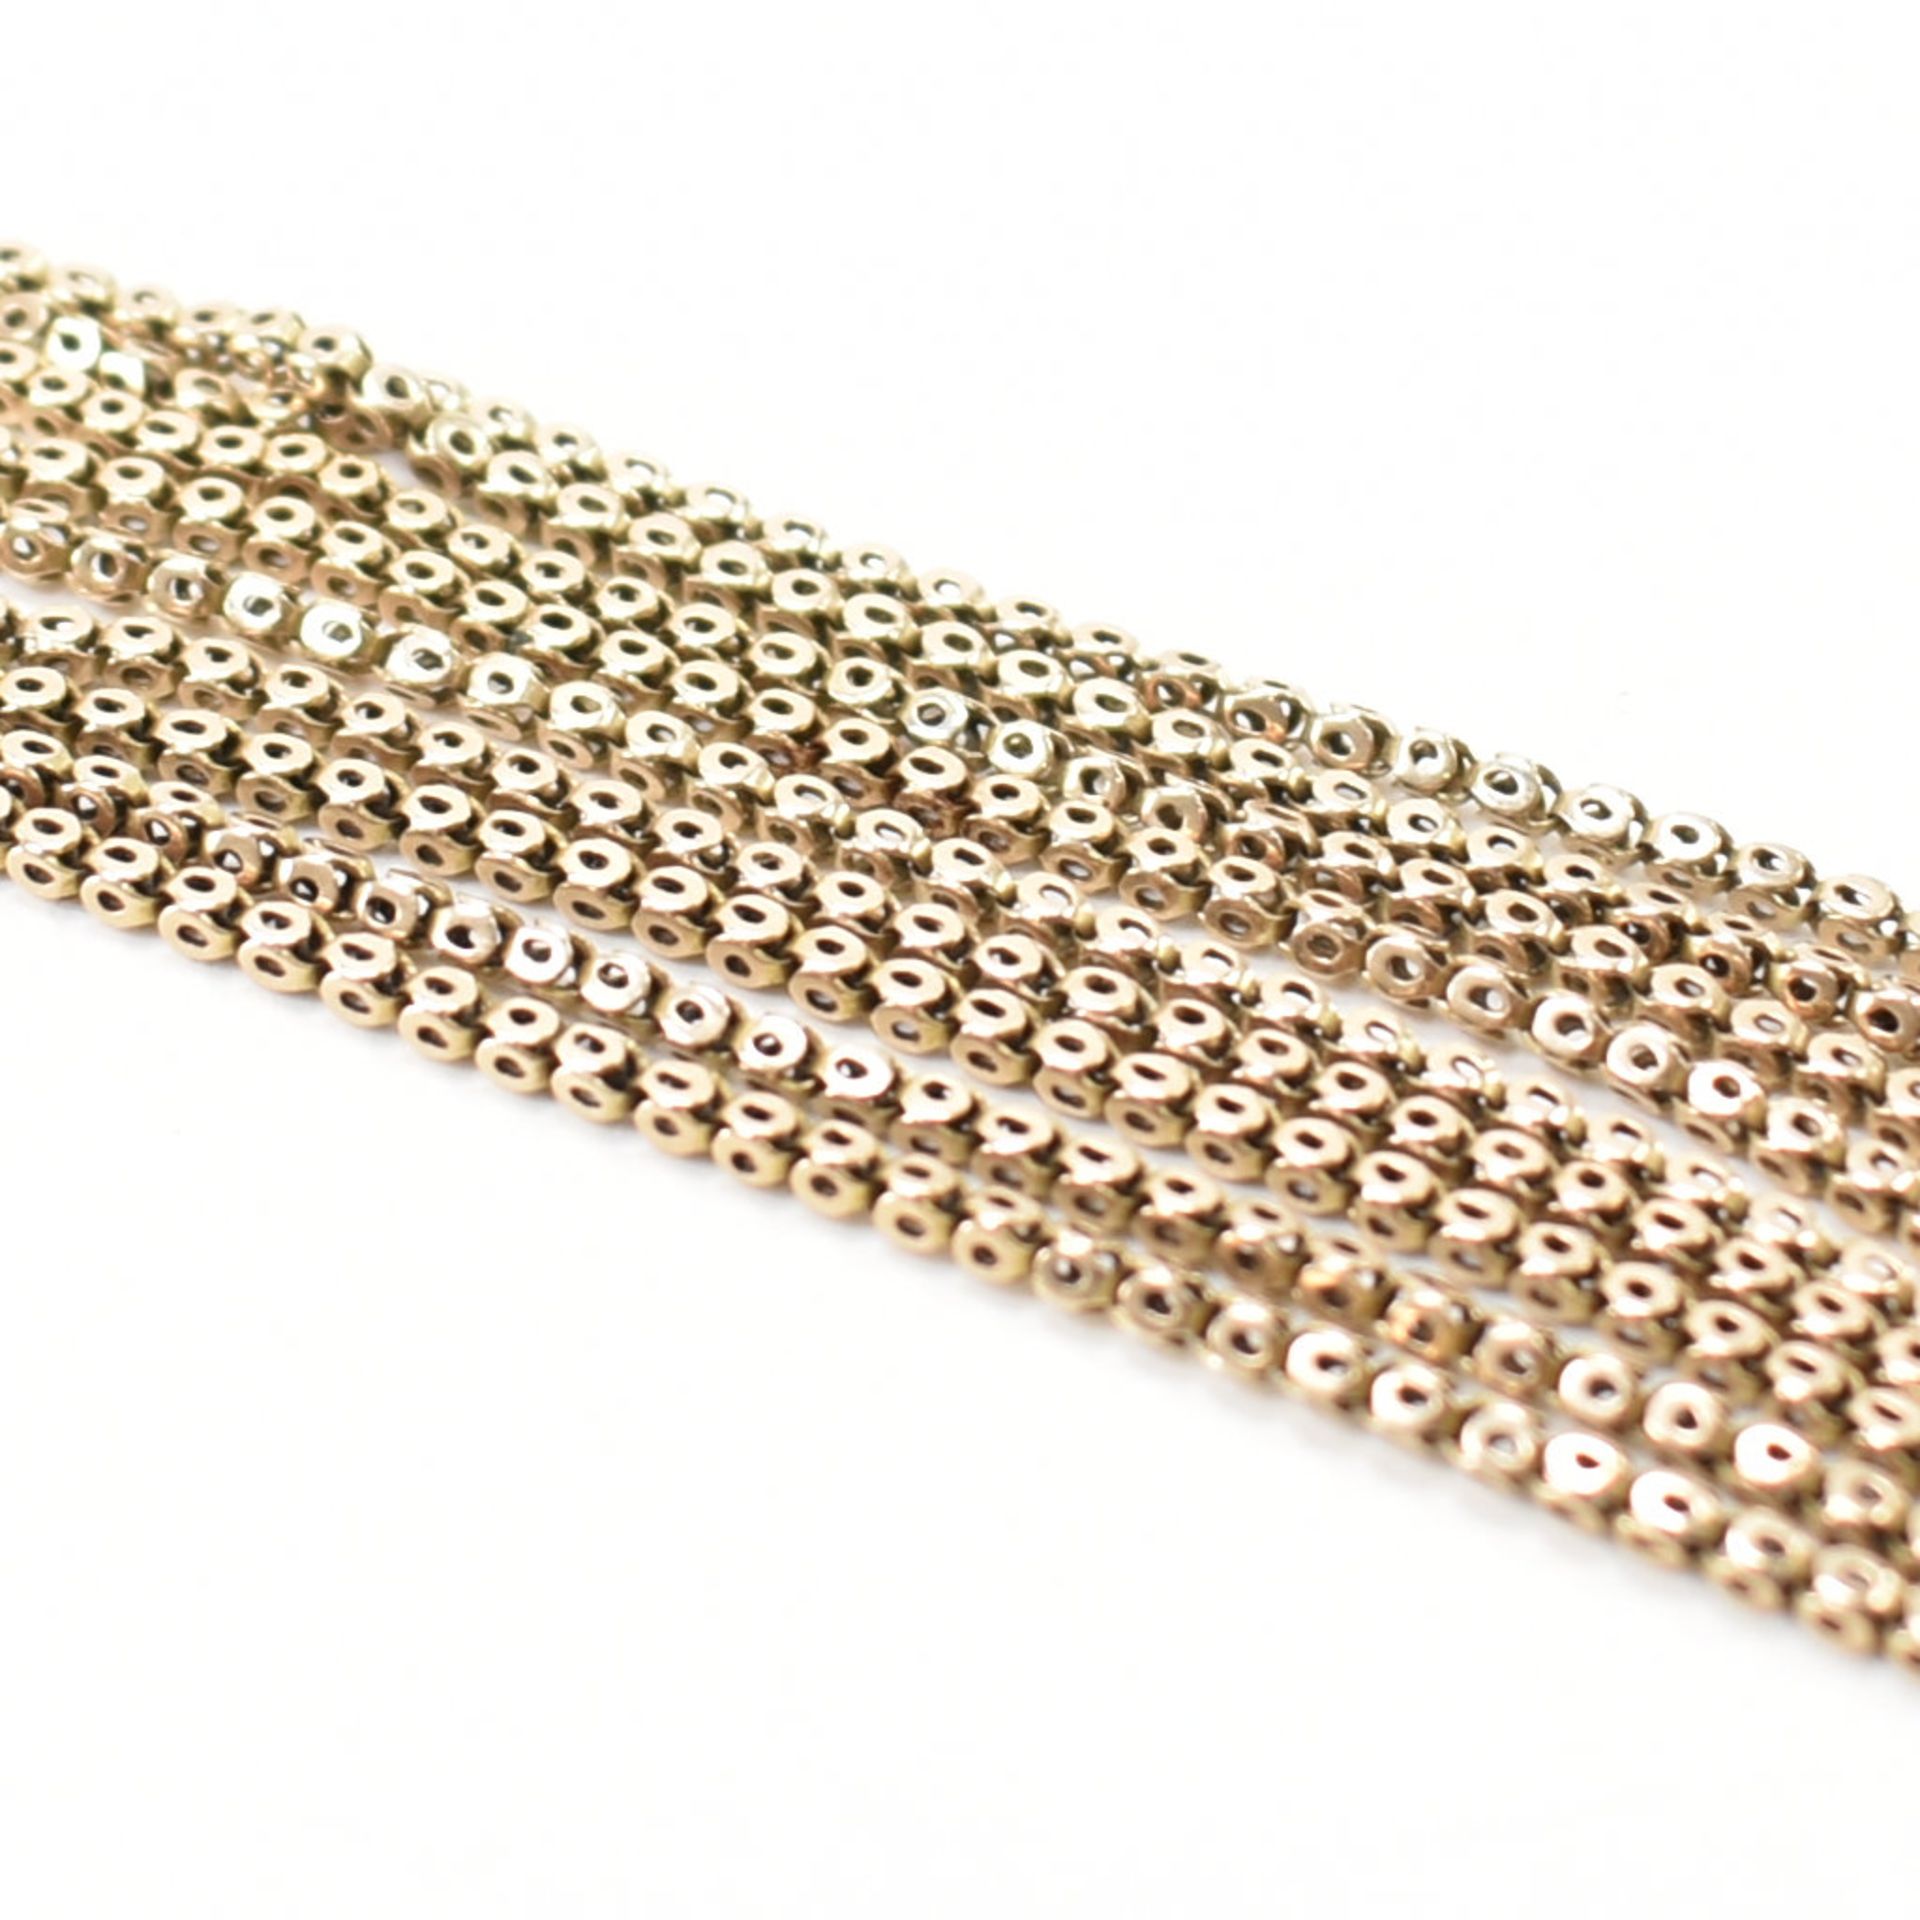 VINTAGE 9CT GOLD THREE STRAND FANCY LINK CHAIN NECKLACE - Image 2 of 4